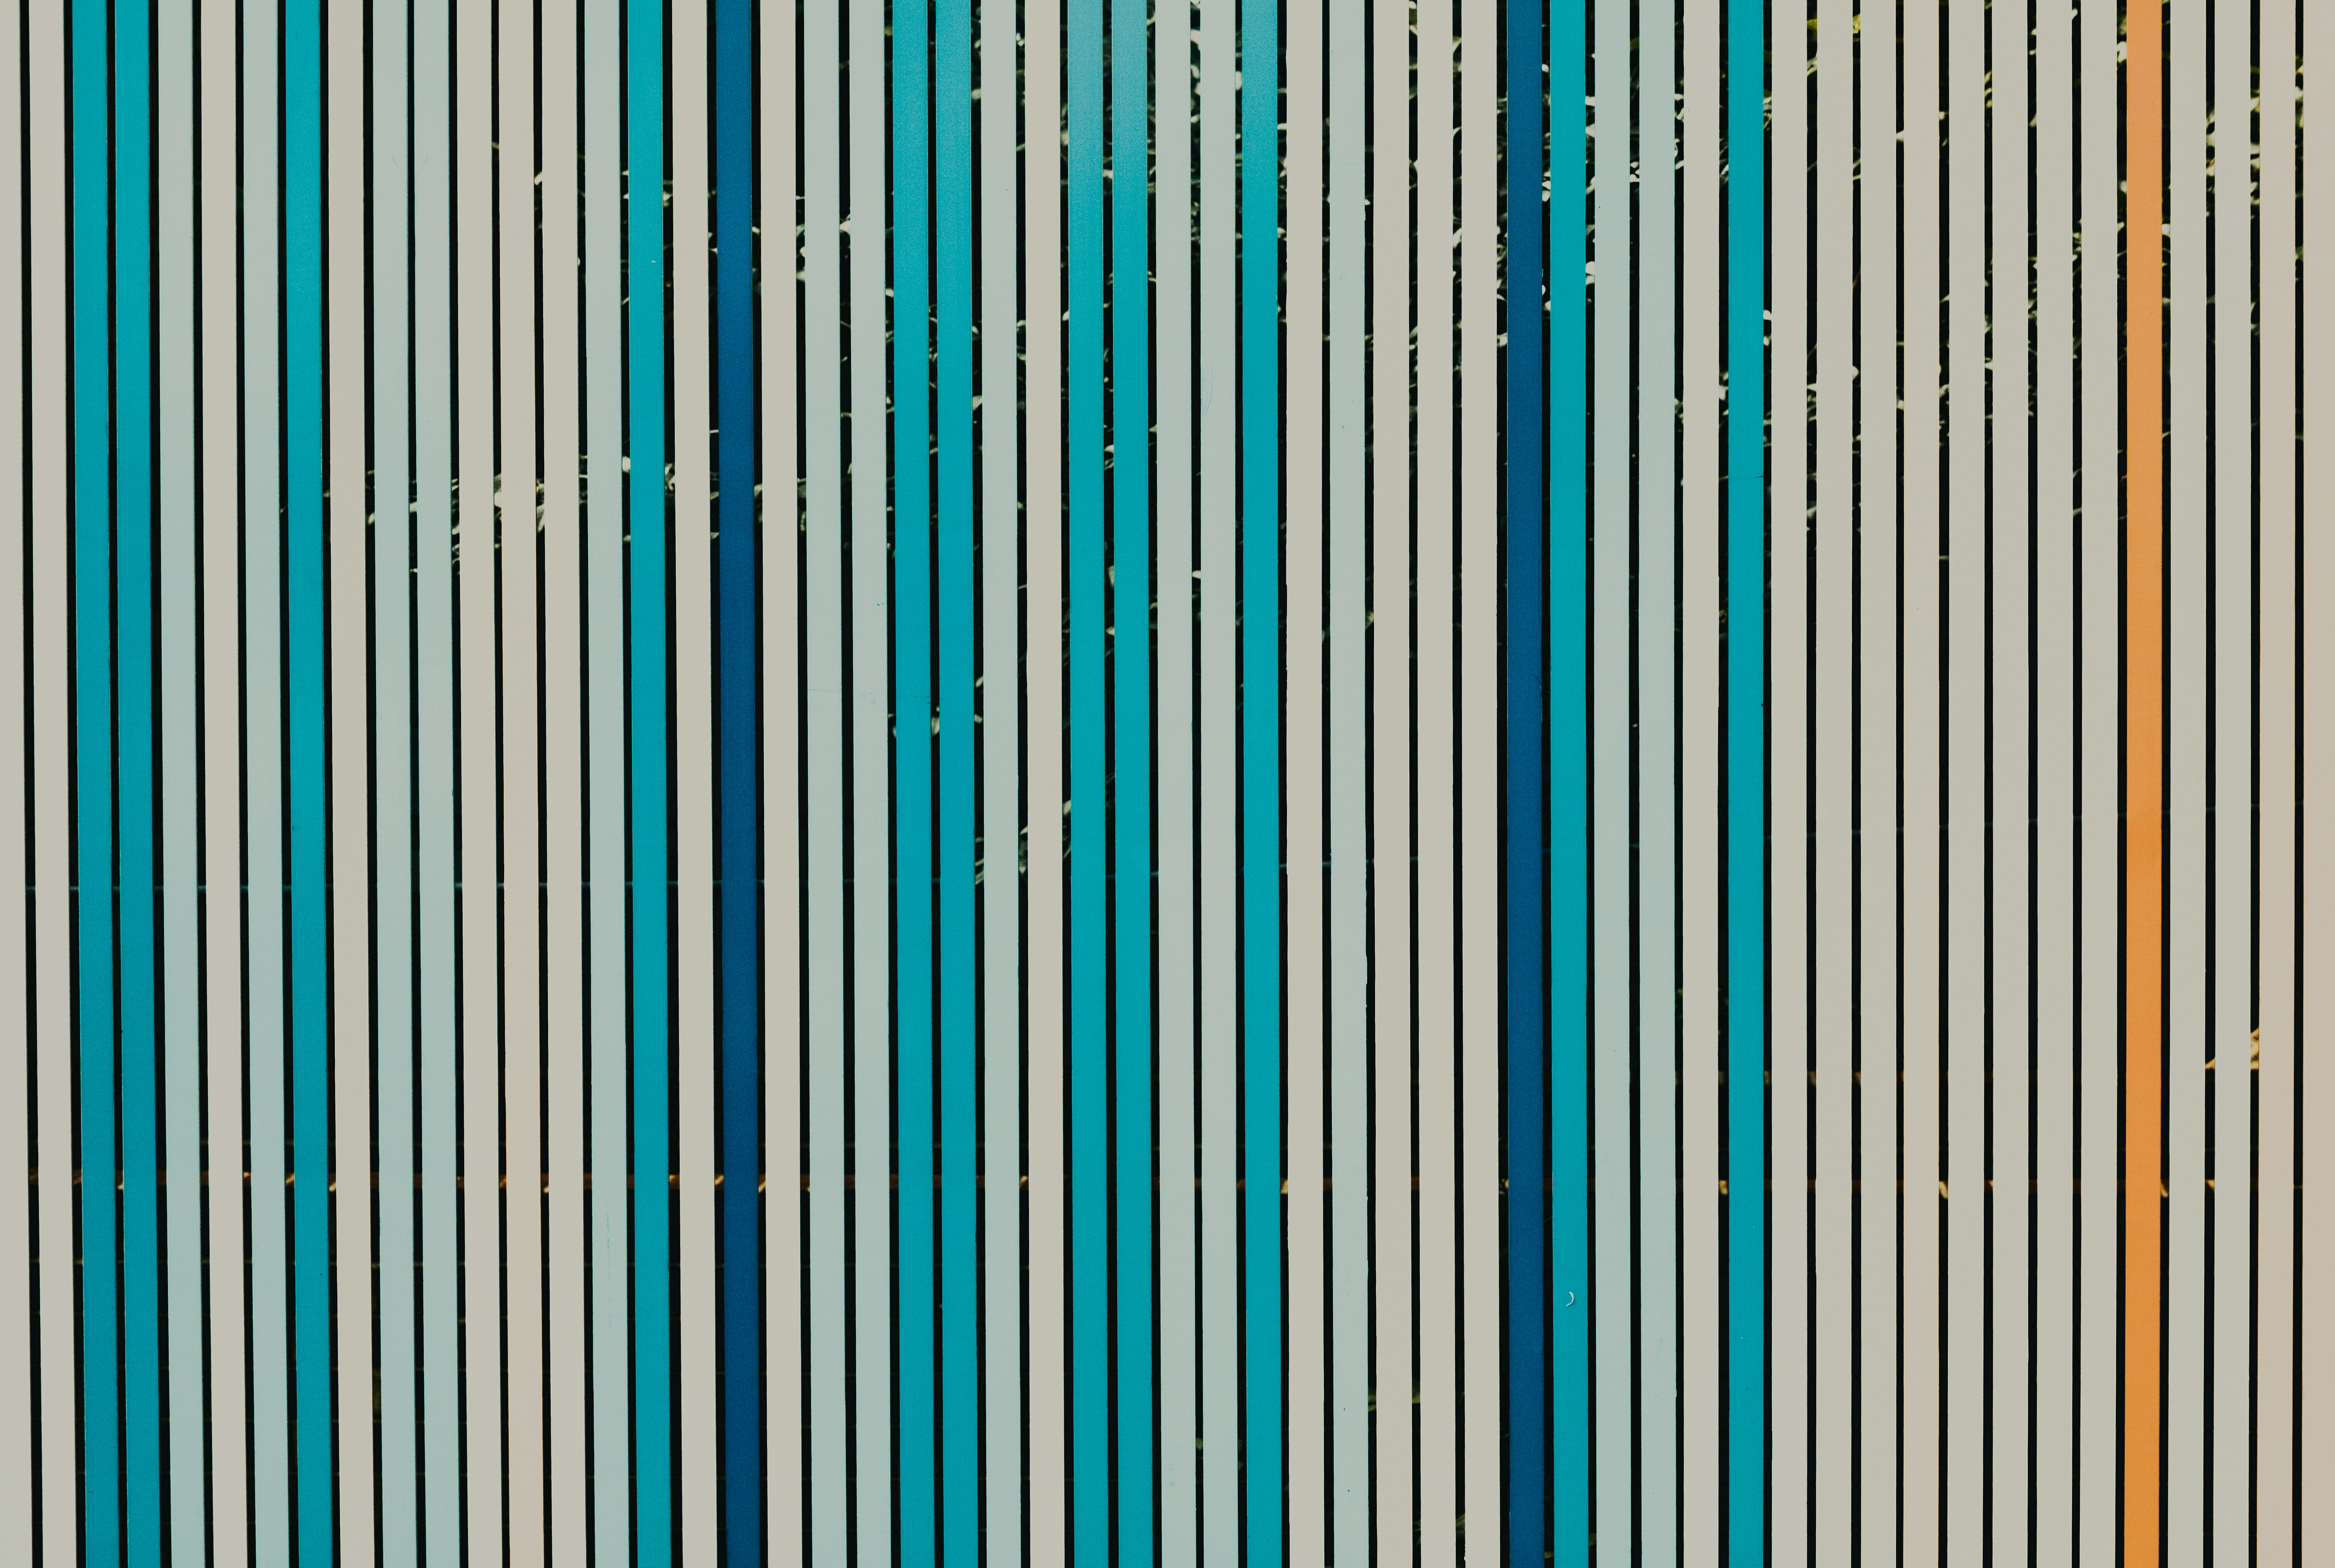 blue and white striped textile